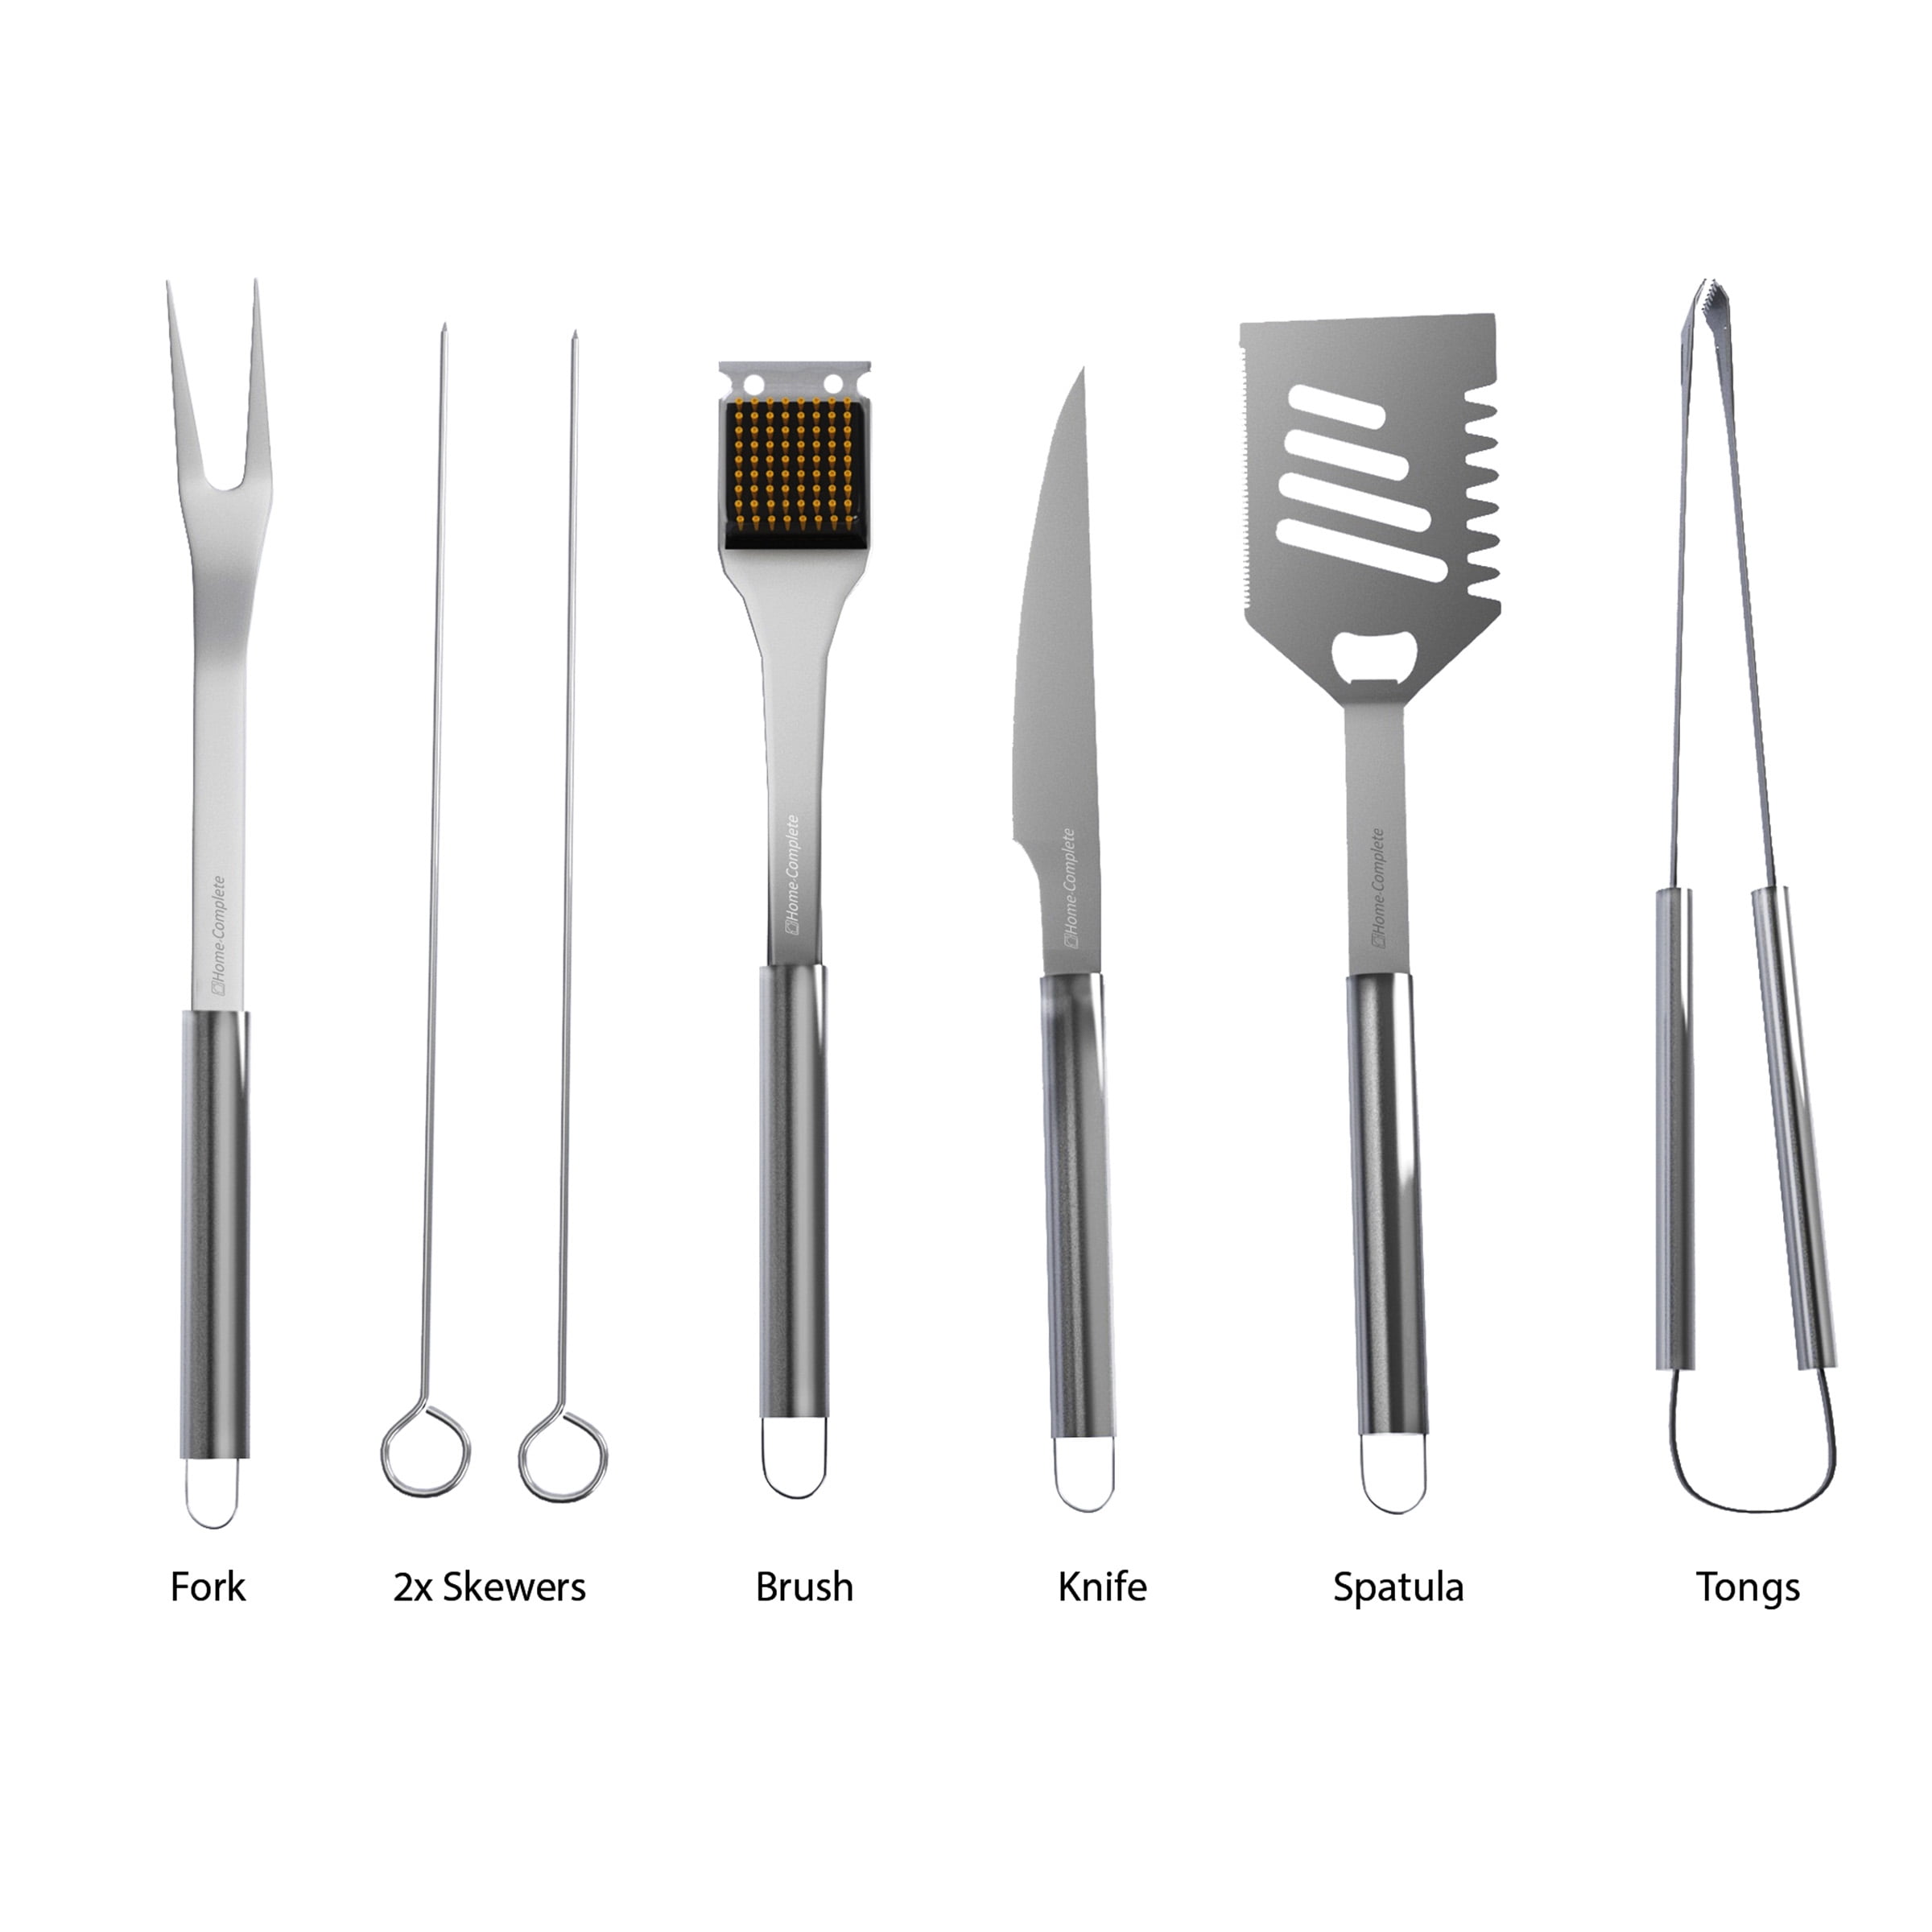 Barbecue Set, Grill Tools Set, Barbecue Grill Tool Set, Bbq Accessories For  Camping, Barbecue Skewers, Tongs, Oil Brush, Bbq Forks, Cleaning Brush,  Spatula, Knife, Meat Hammer, Storage Bag, Kitchen Supplices, Camping  Supplies 